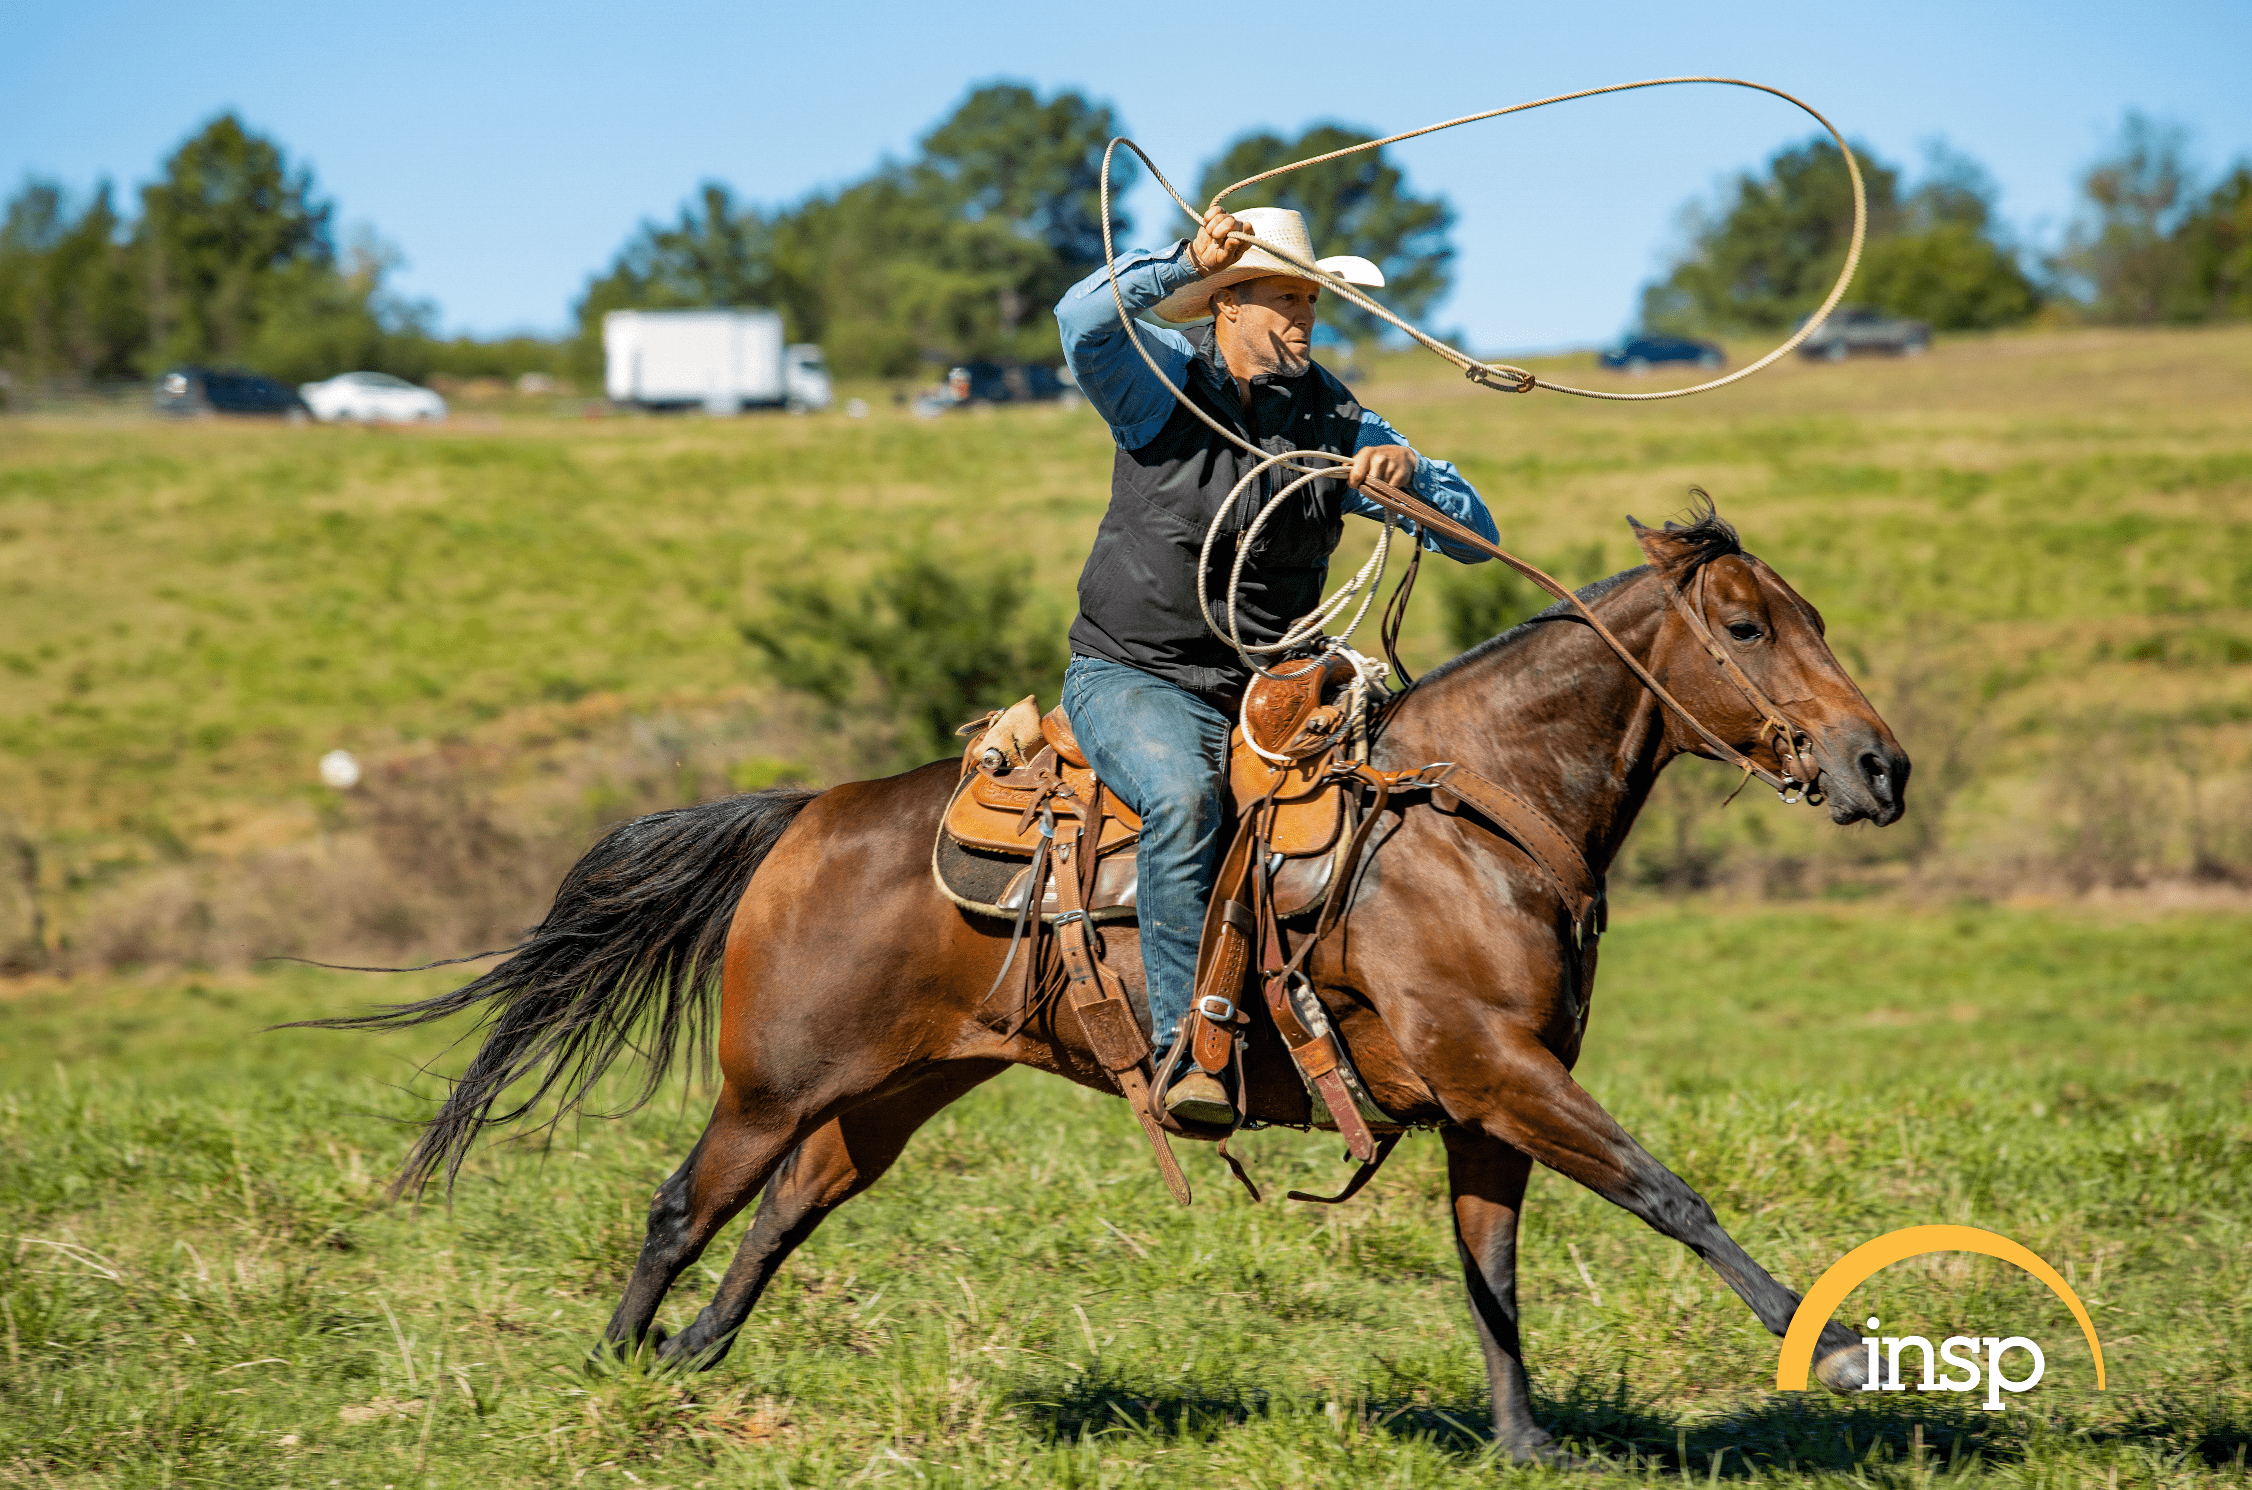 "The Cowboy Way" star Bubba Thompson rides a horse. | Source: INSP